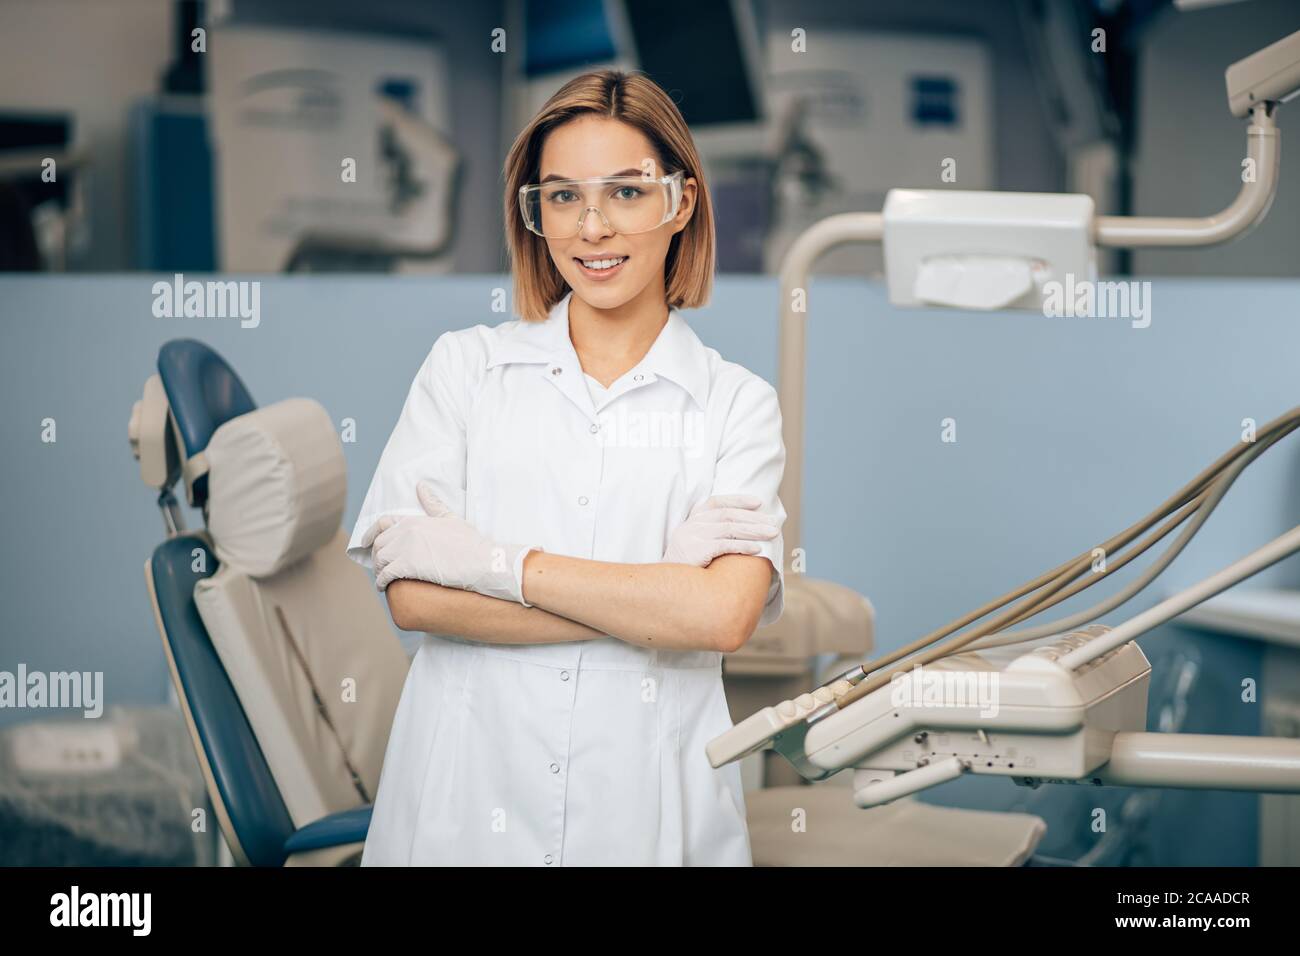 portrait of female dentist in white doctor's uniform standing in office near equipment and look at camera. Medicine, dentist, orthodontic concept Stock Photo